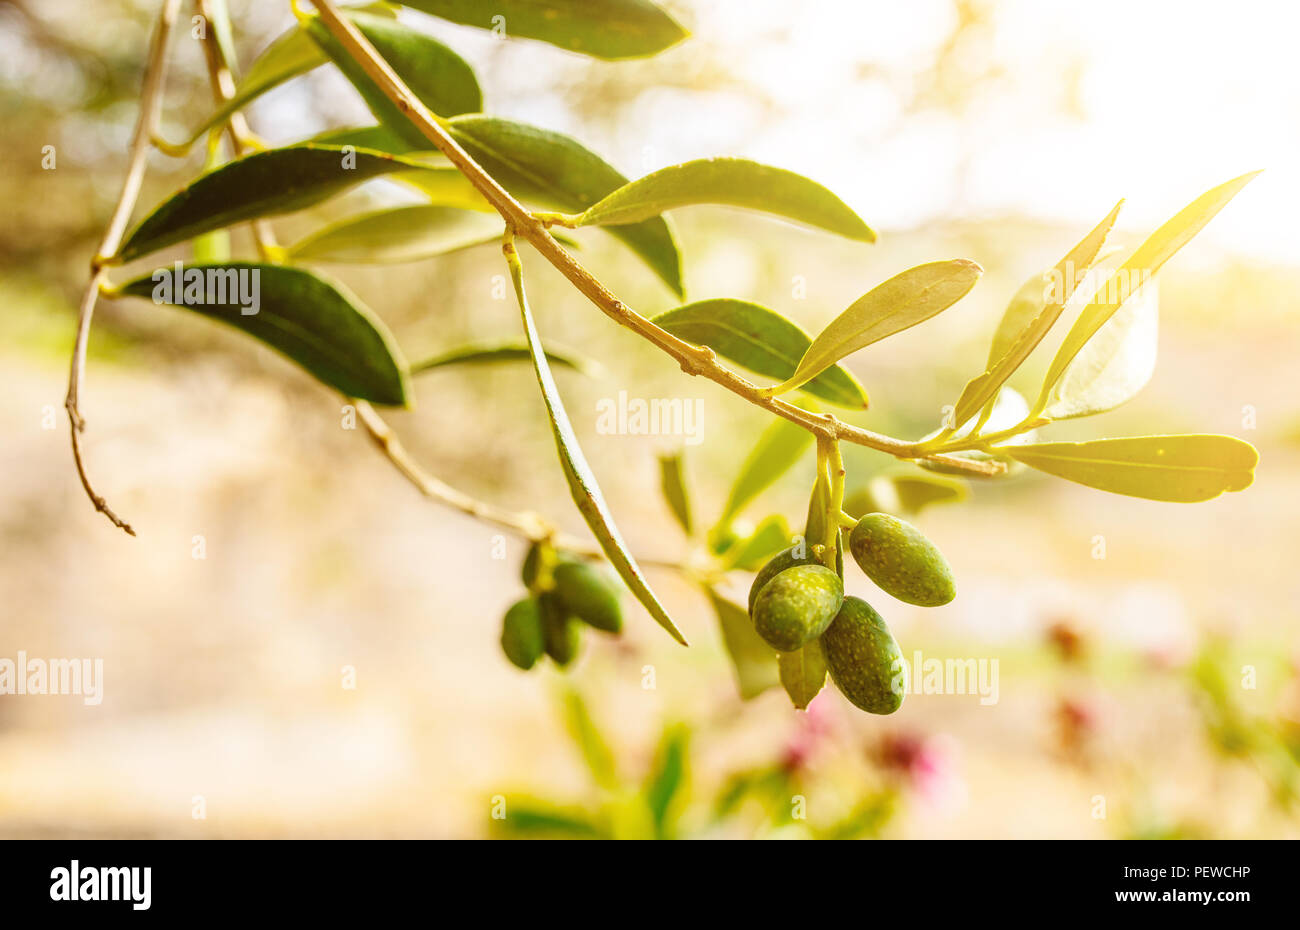 green olives on branch of olive tree Stock Photo